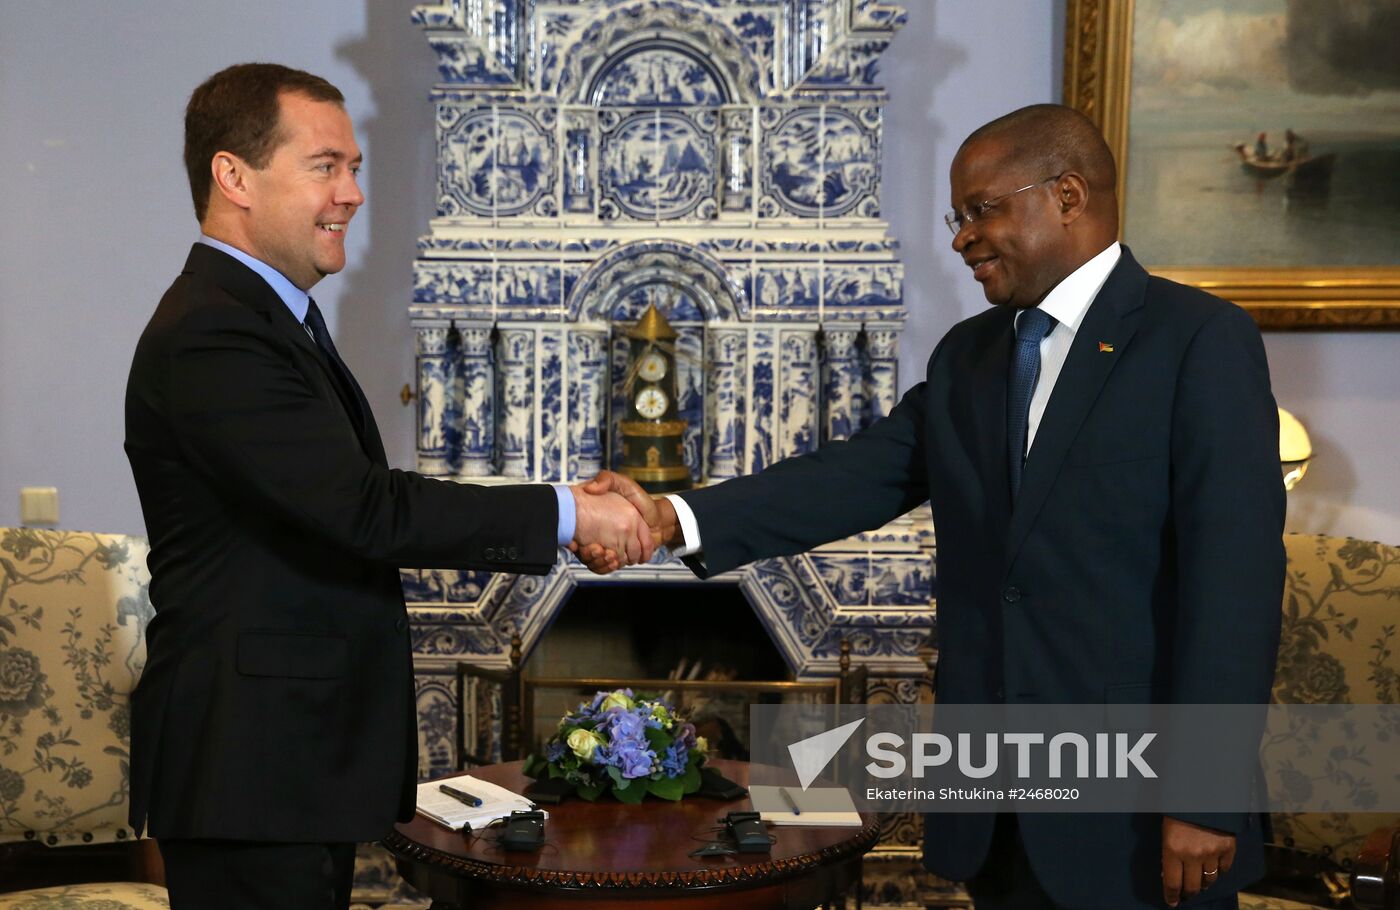 Dmitry Medvedev meets with Alberto Vaquina